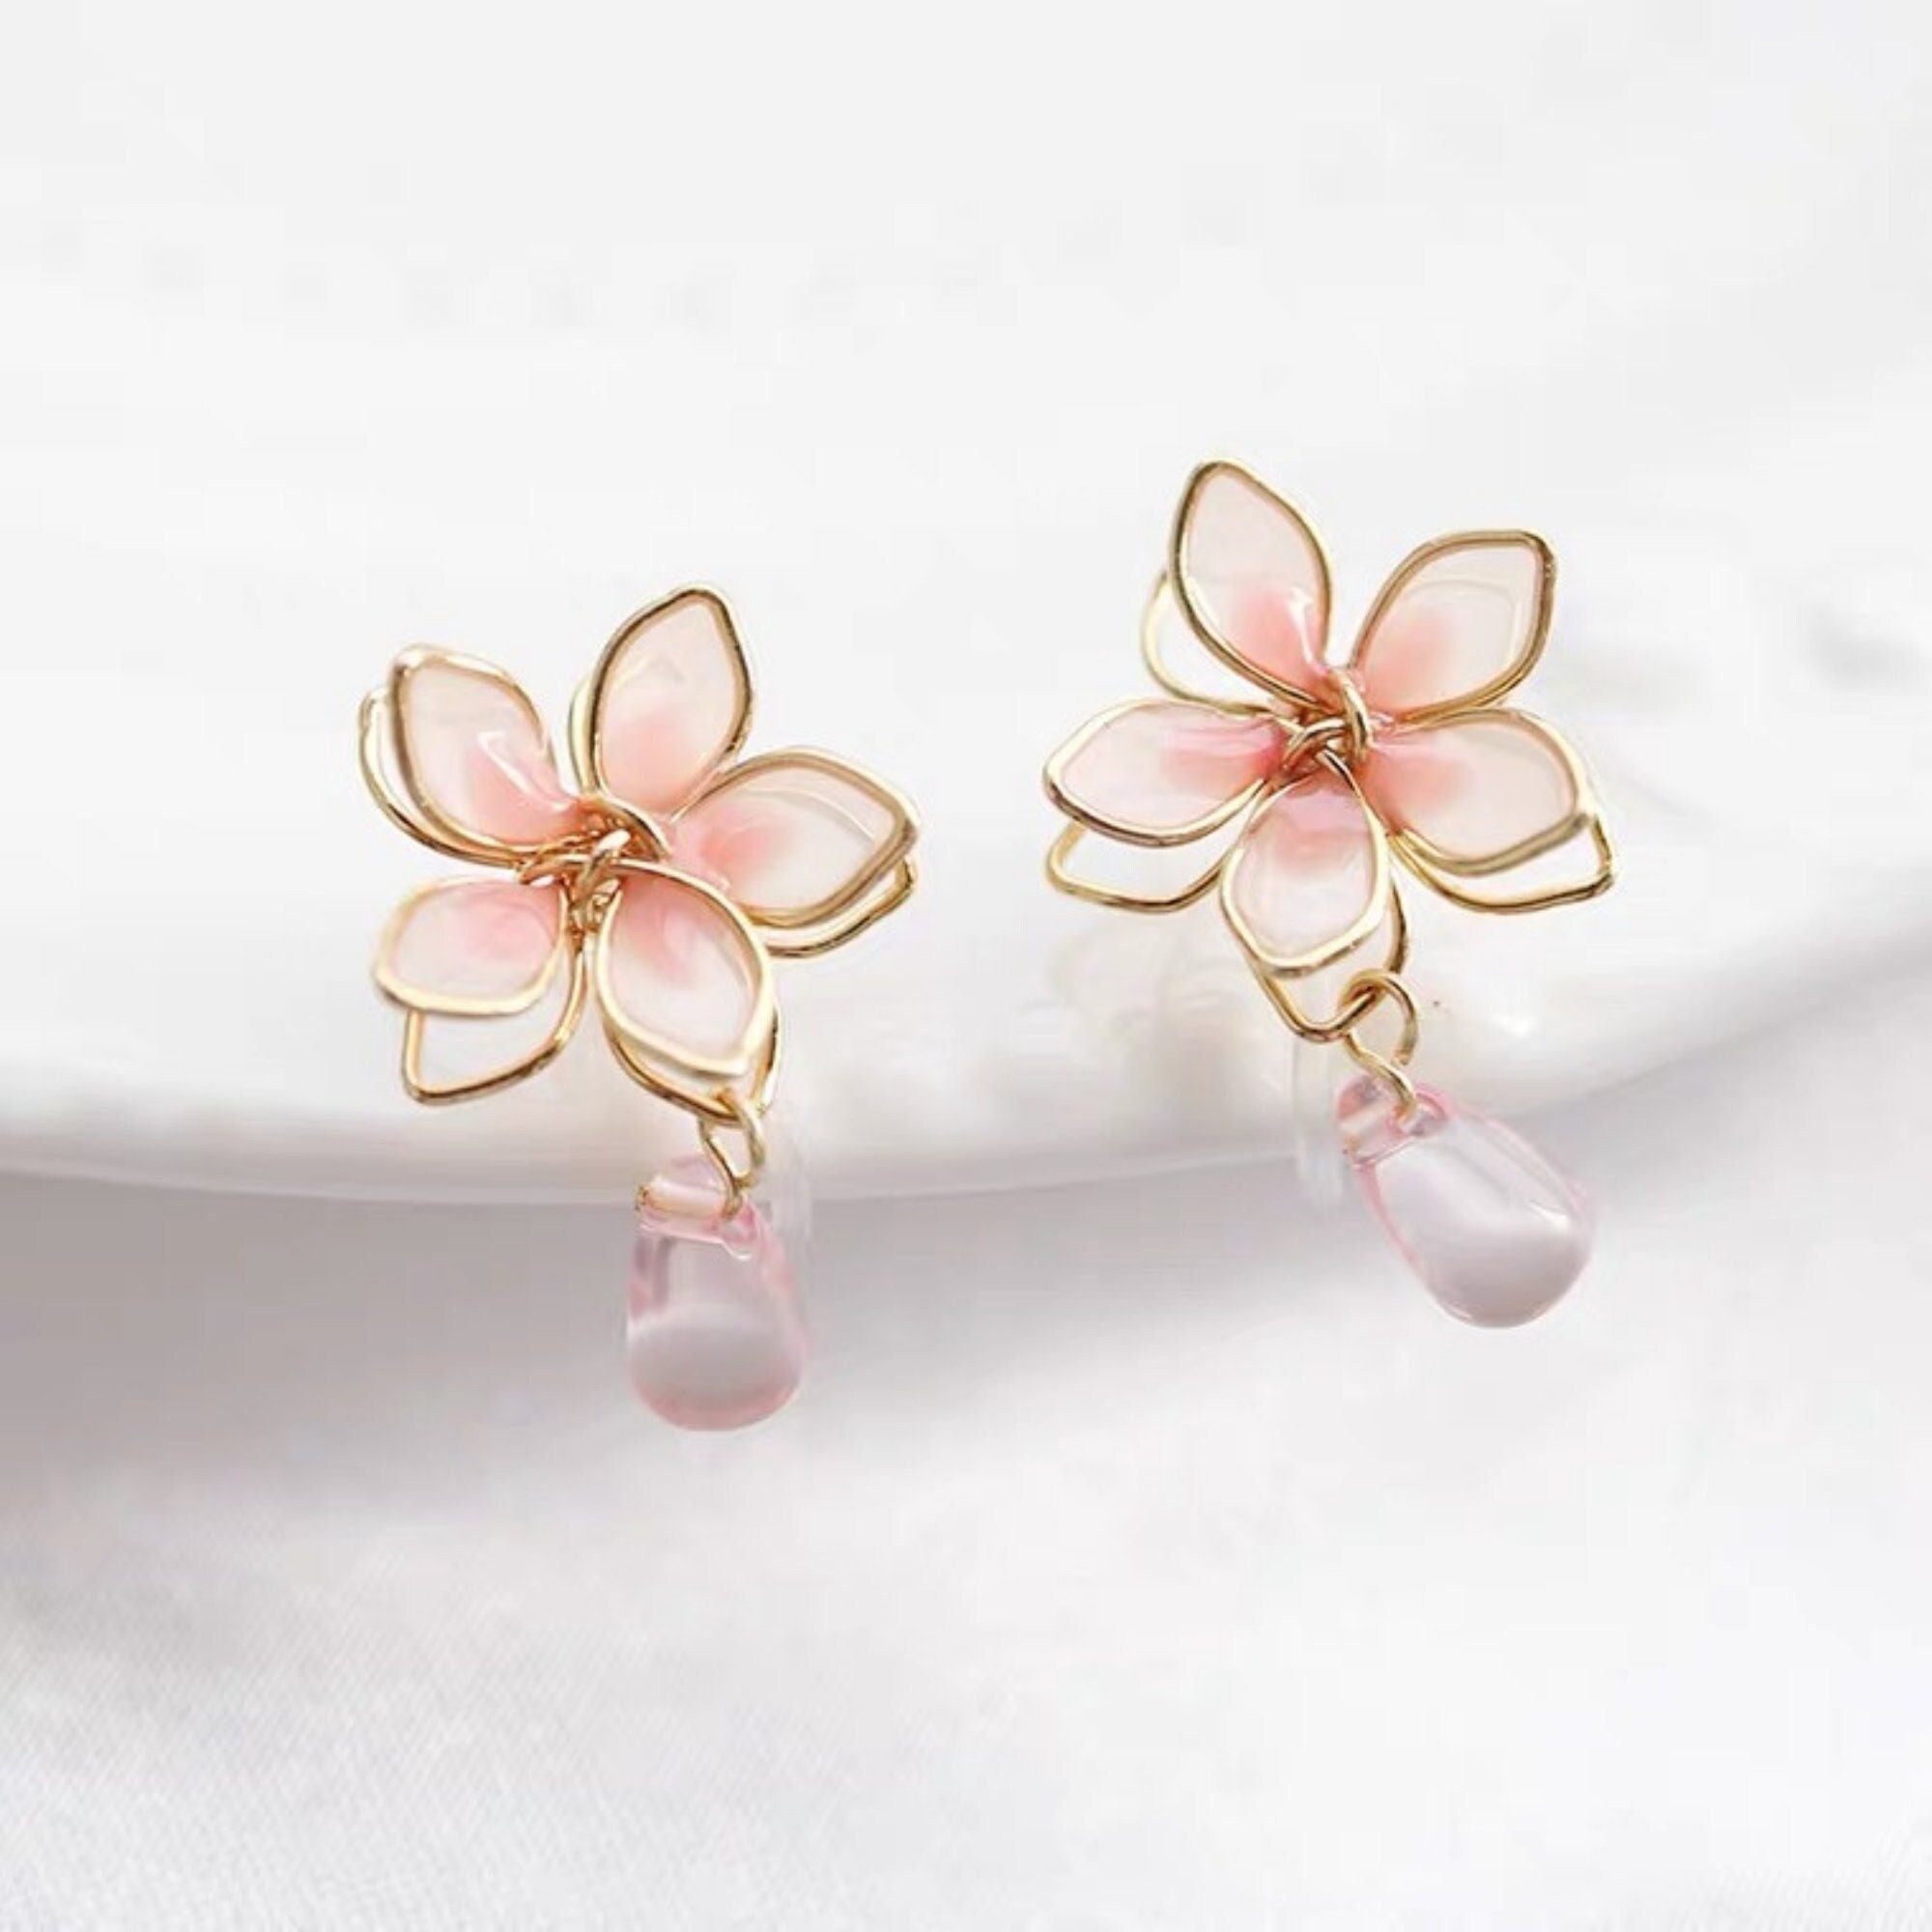 Vintage Deadstock Pink Double Feather & Daisy Clip On Earrings Jewellery Earrings Clip-On Earrings 